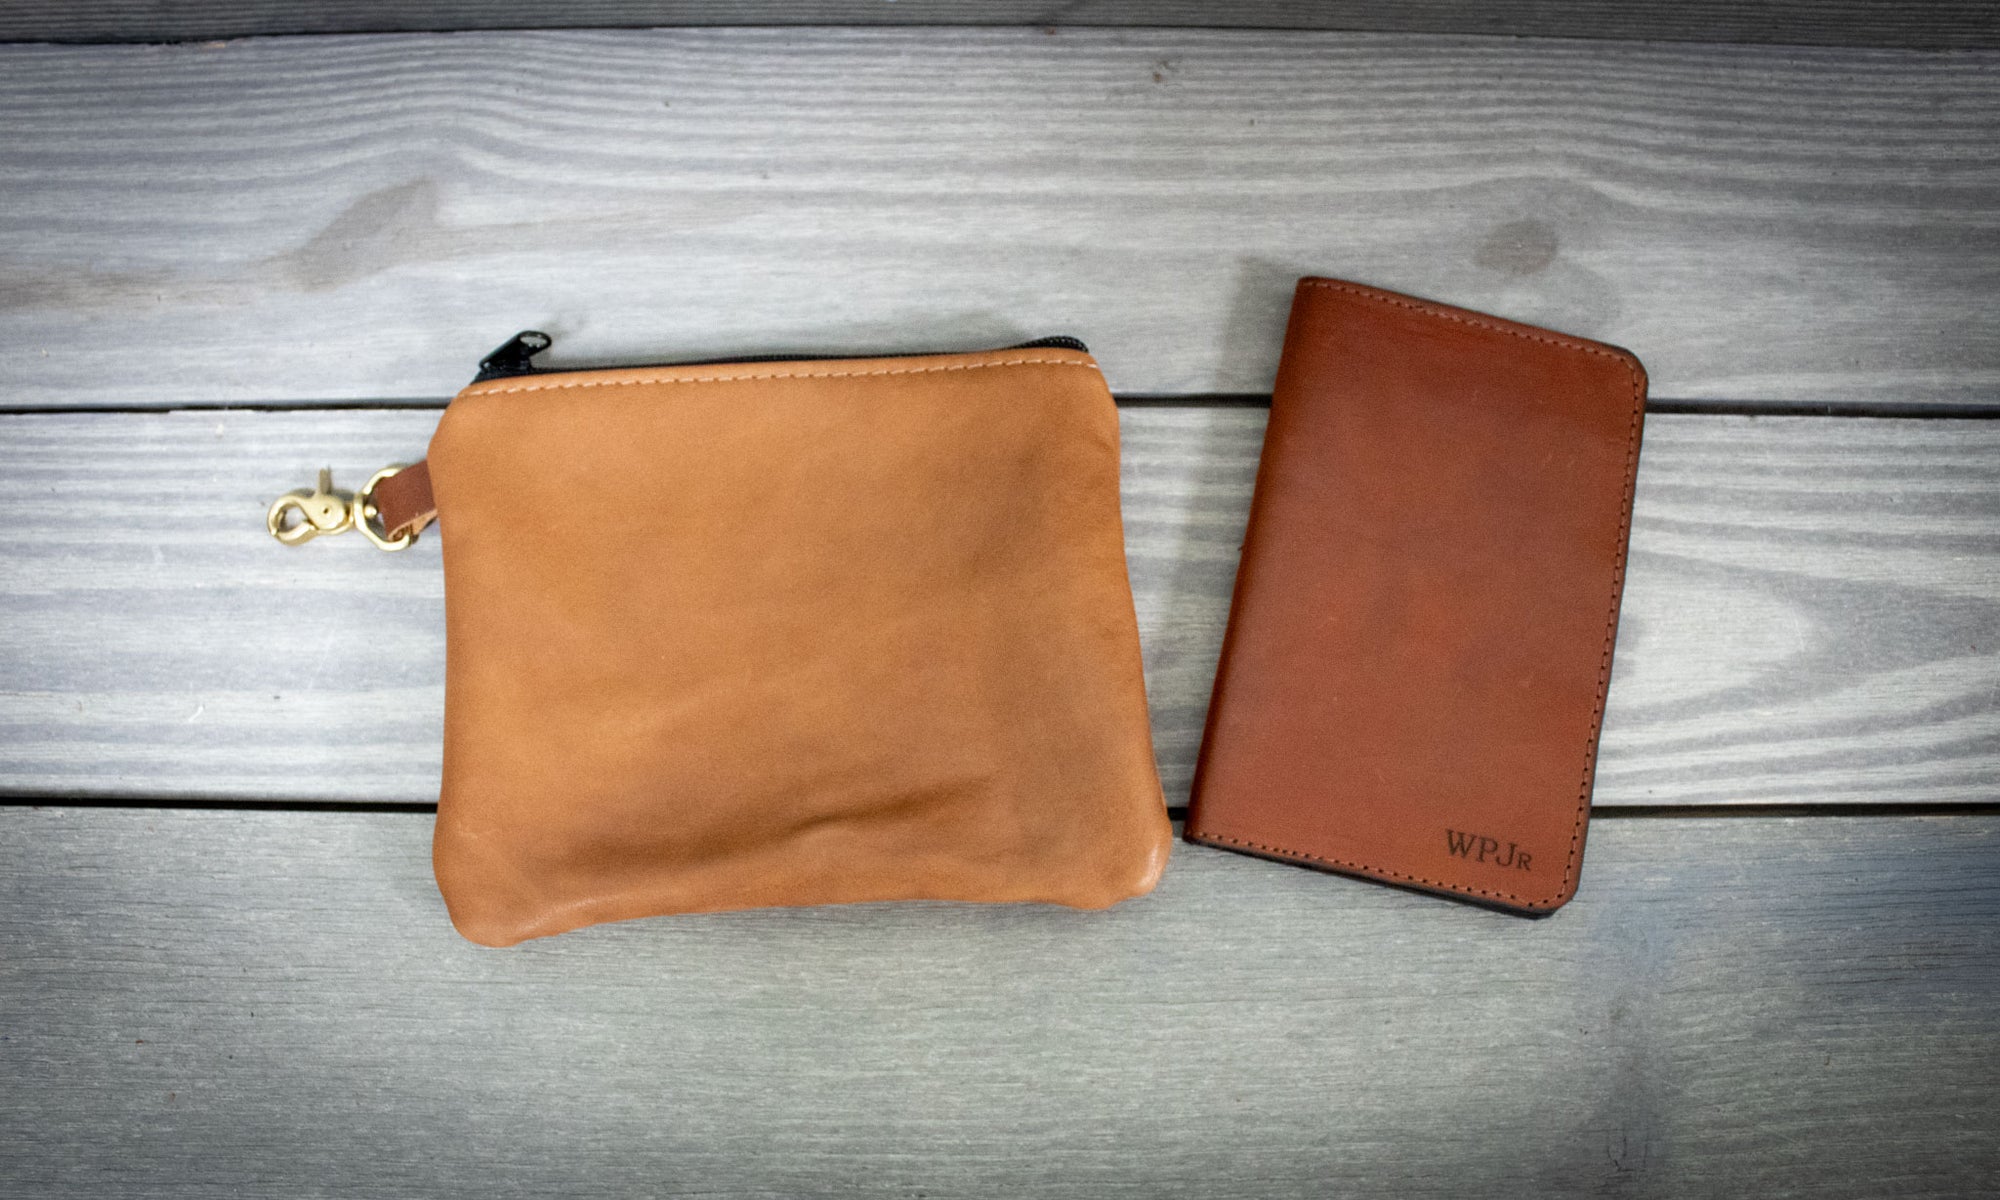 Natural Leather Tee Pouch and Natural Leather Scorecard Holder- Steurer & Jacoby